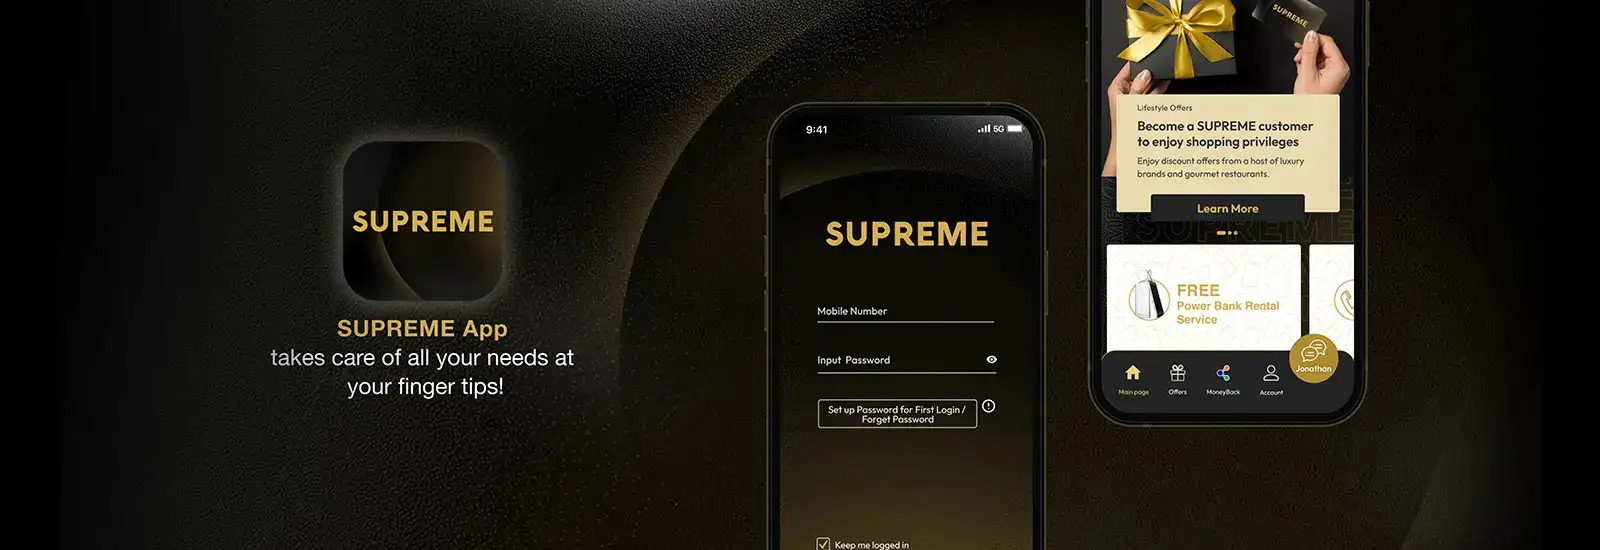 The new SUPREME App brings you a brand new personalised experiences from checking account information to data usage, and from receive exclusive rewards to contact your personal executive. 